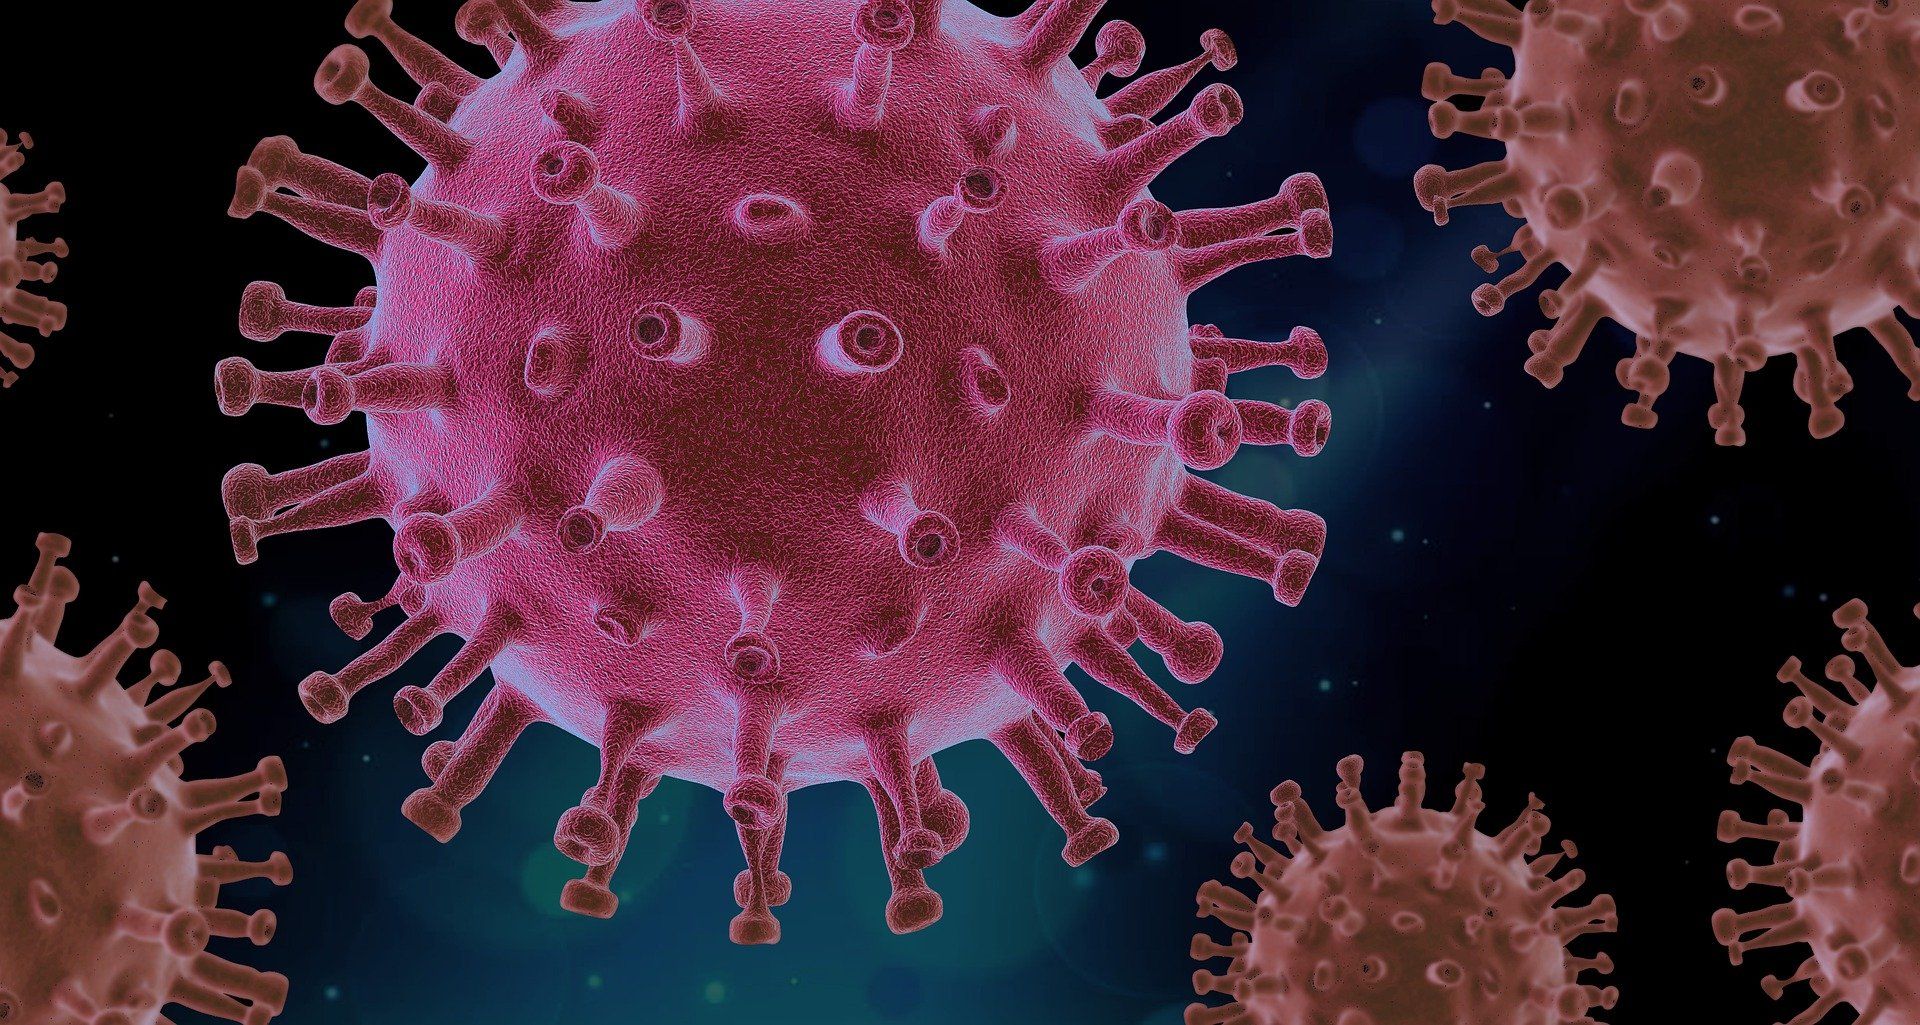 US looking ‘very carefully’ at new virus variant